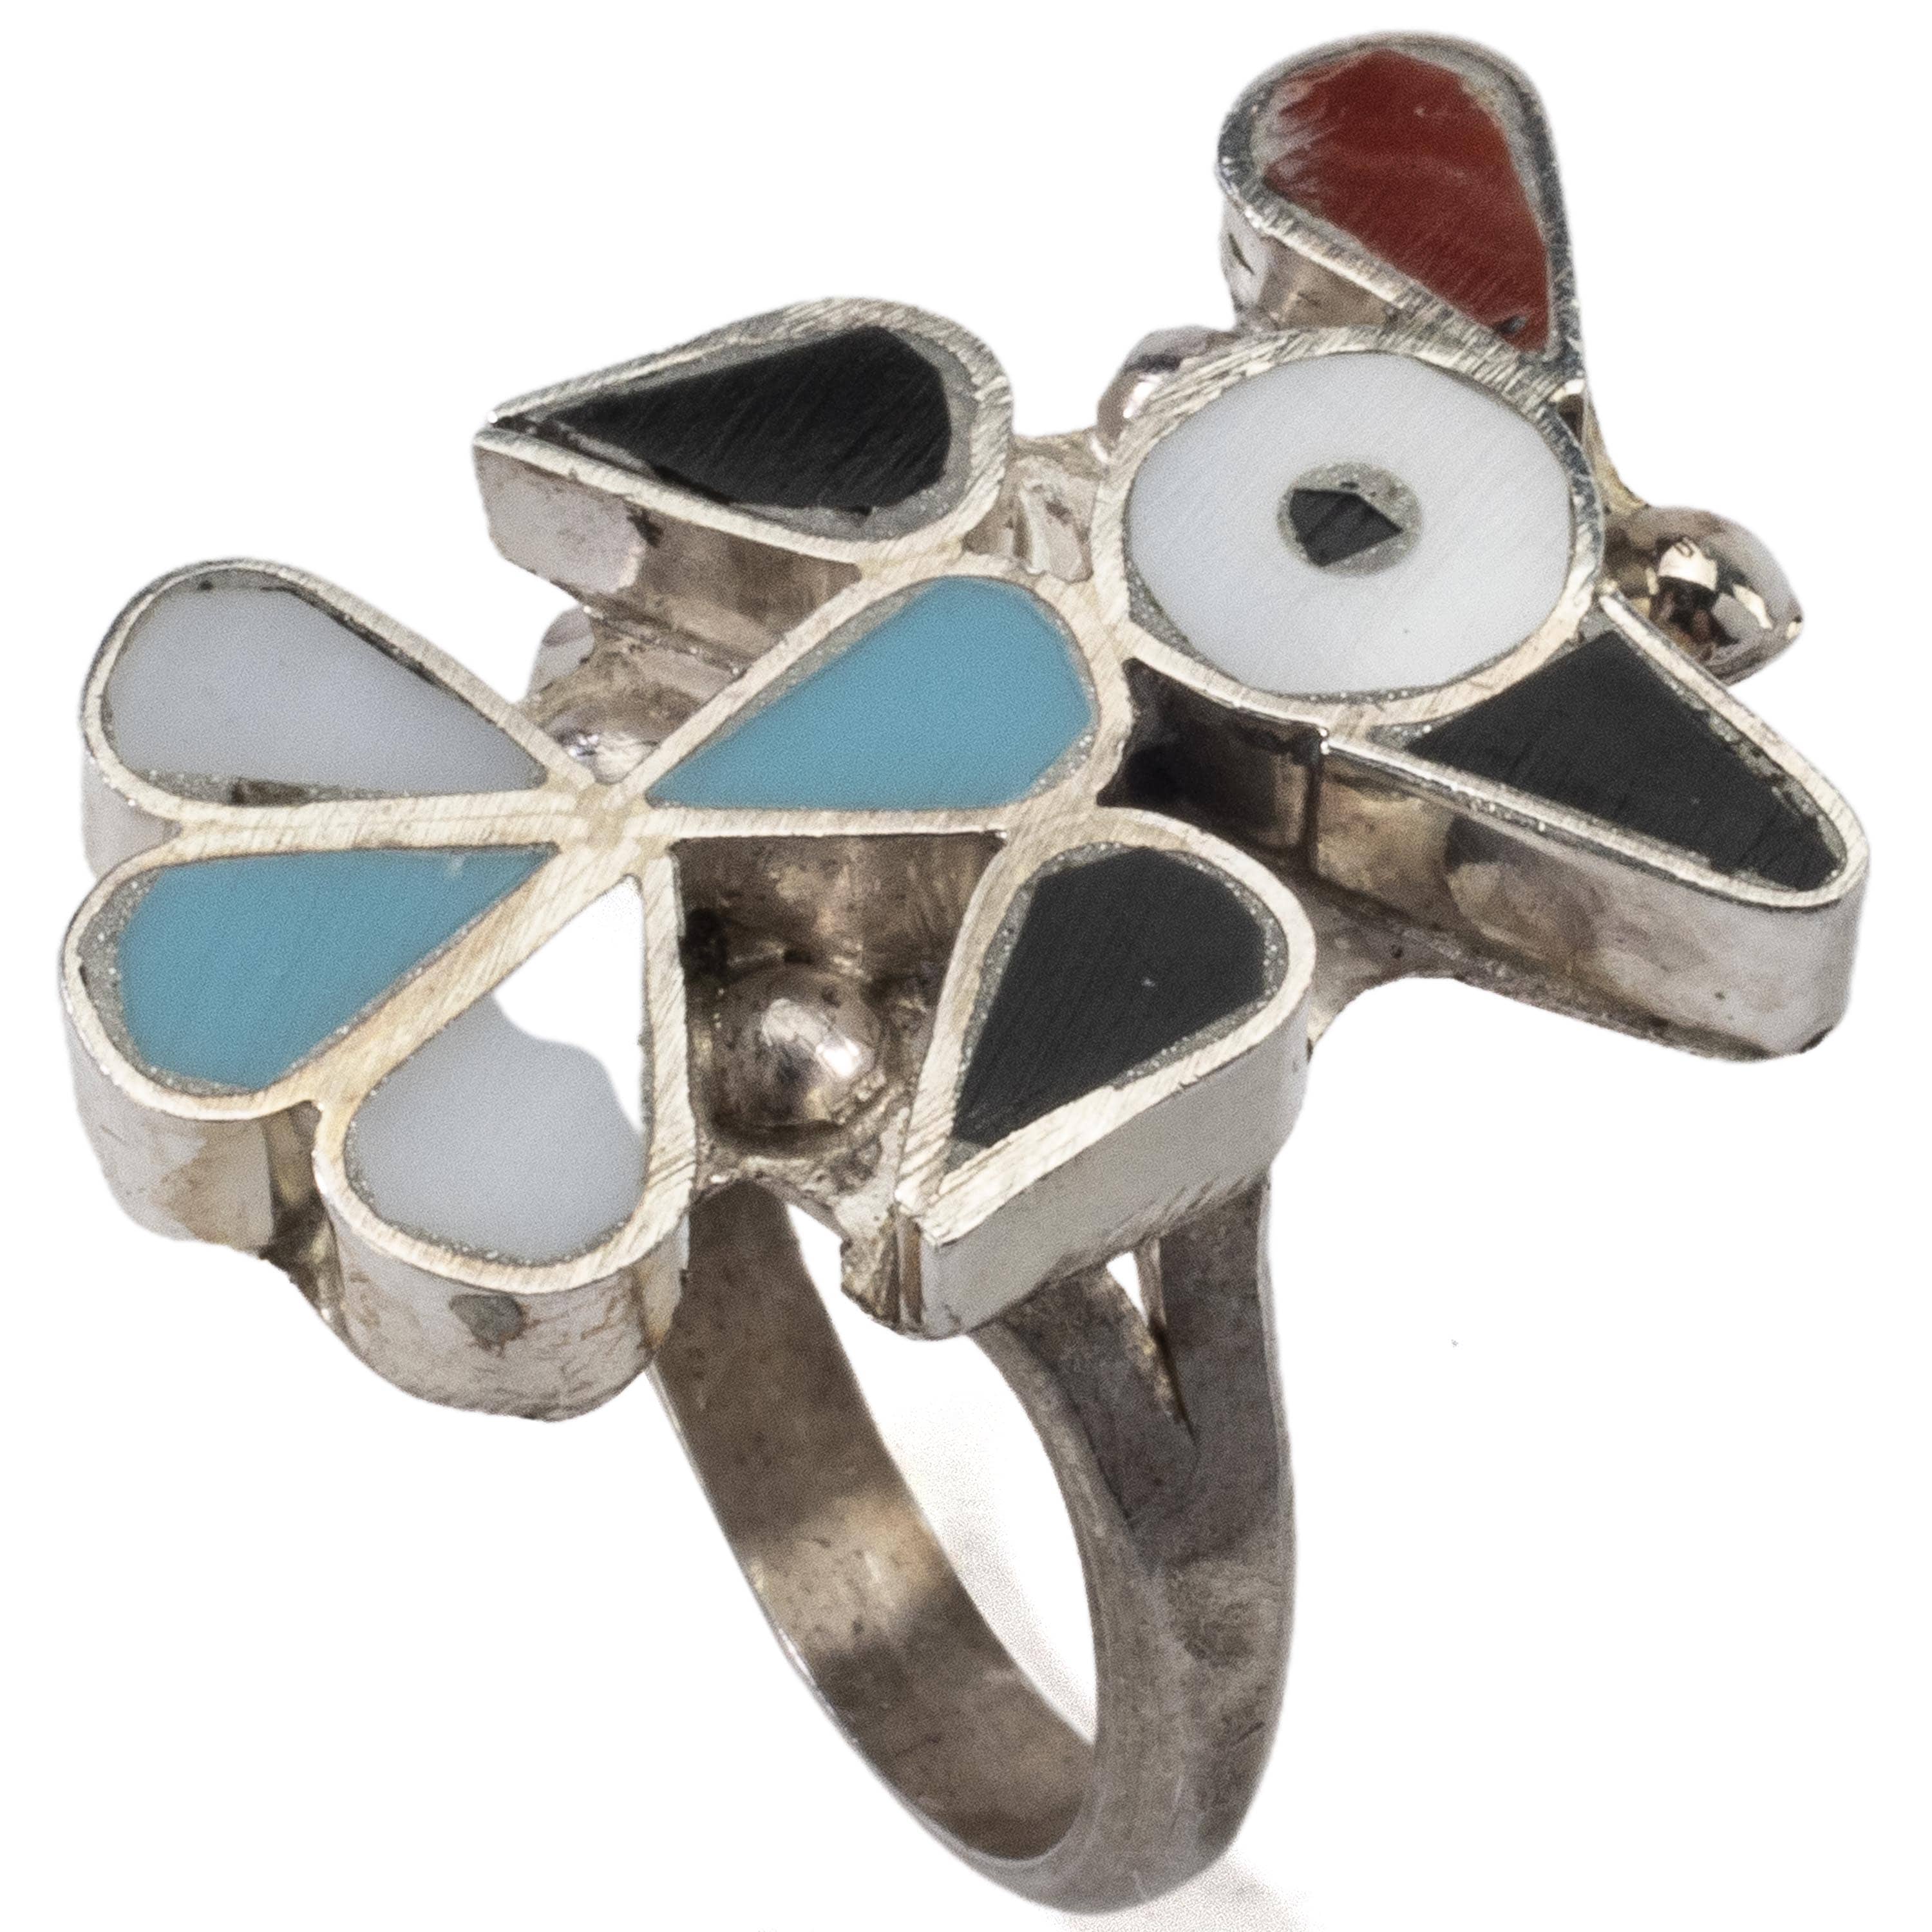 Kalifano Native American Jewelry 6 Pino Yunie Zuni Peyote Bird with Mother of Pearl, Black Onyx, Turquoise, and Coral USA Native American Made 925 Sterling Silver Ring NAR200.018.6